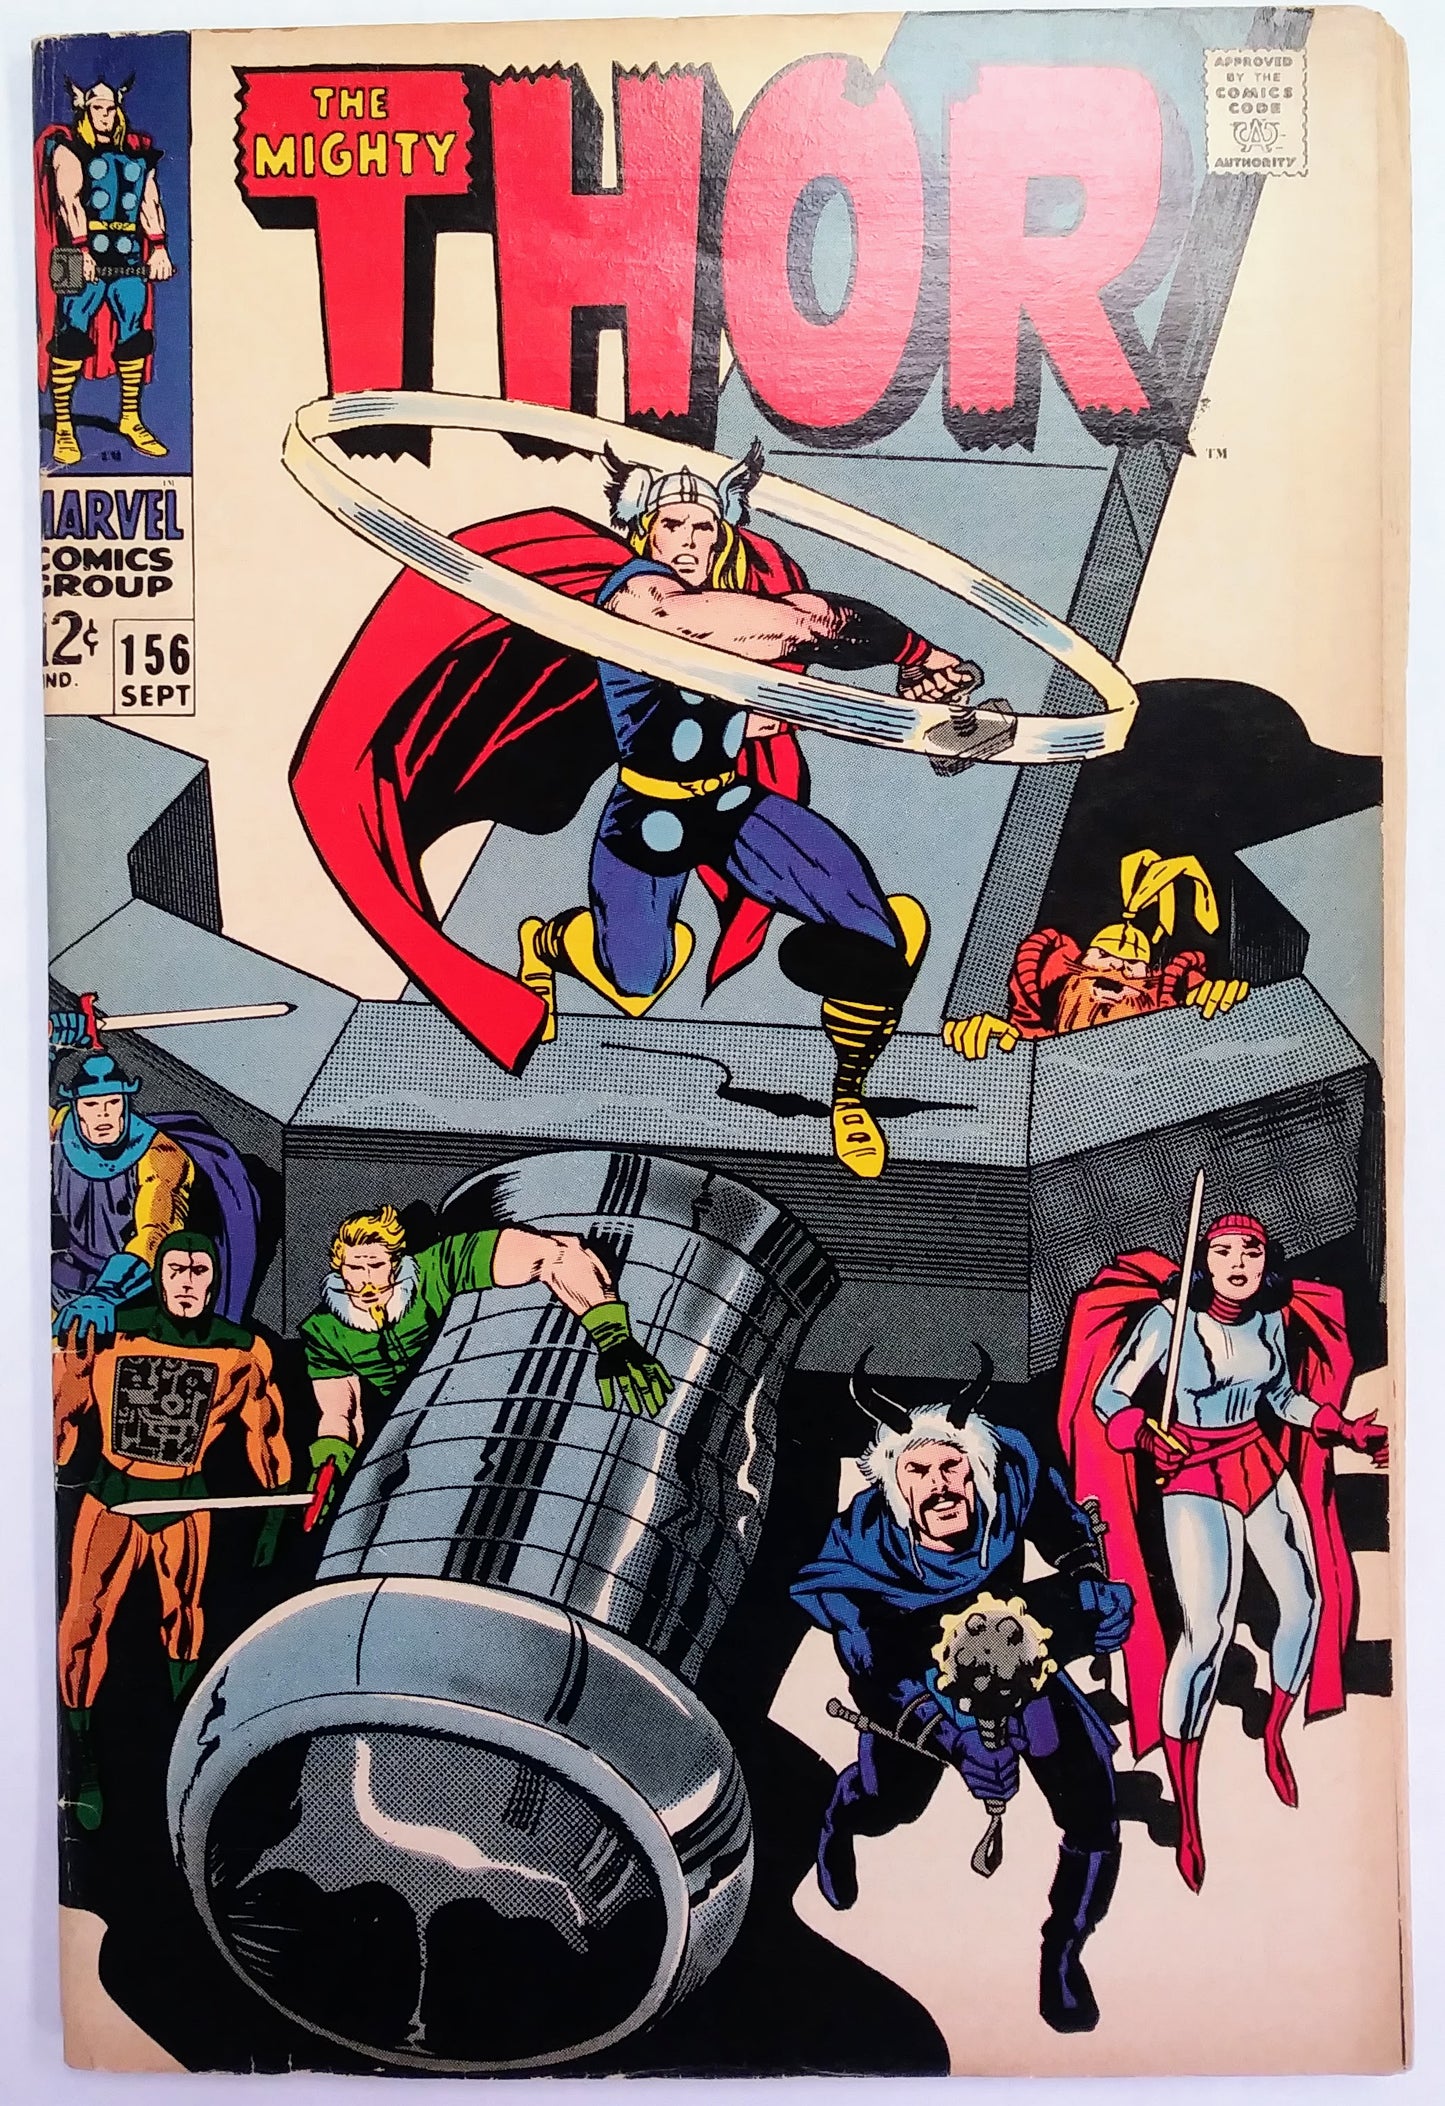 The Mighty Thor #156, Marvel Comics (September 1968)